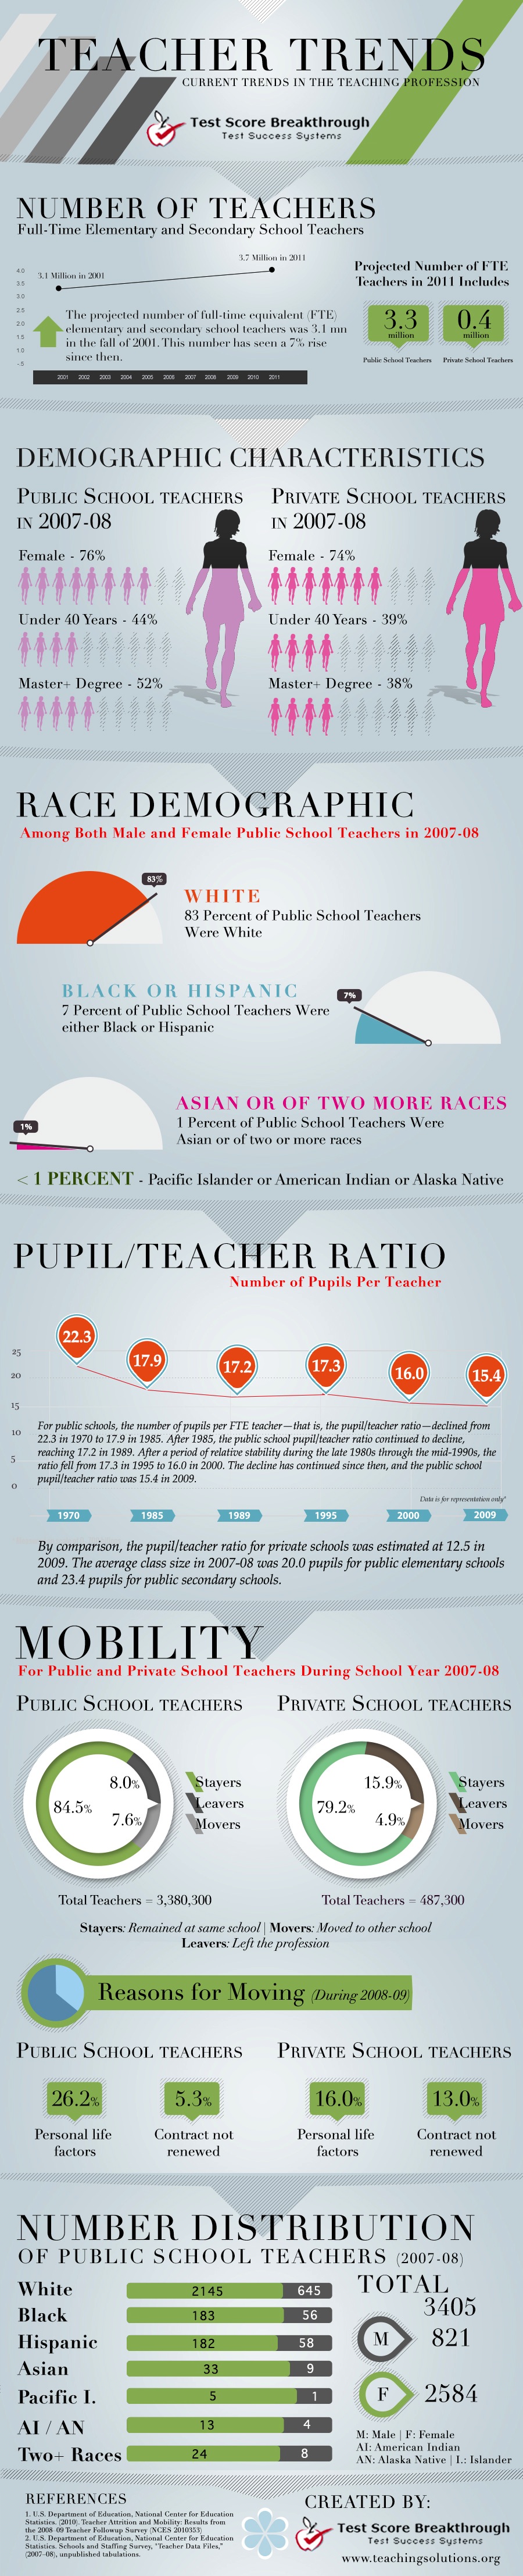 Current Trends In The Teaching Profession